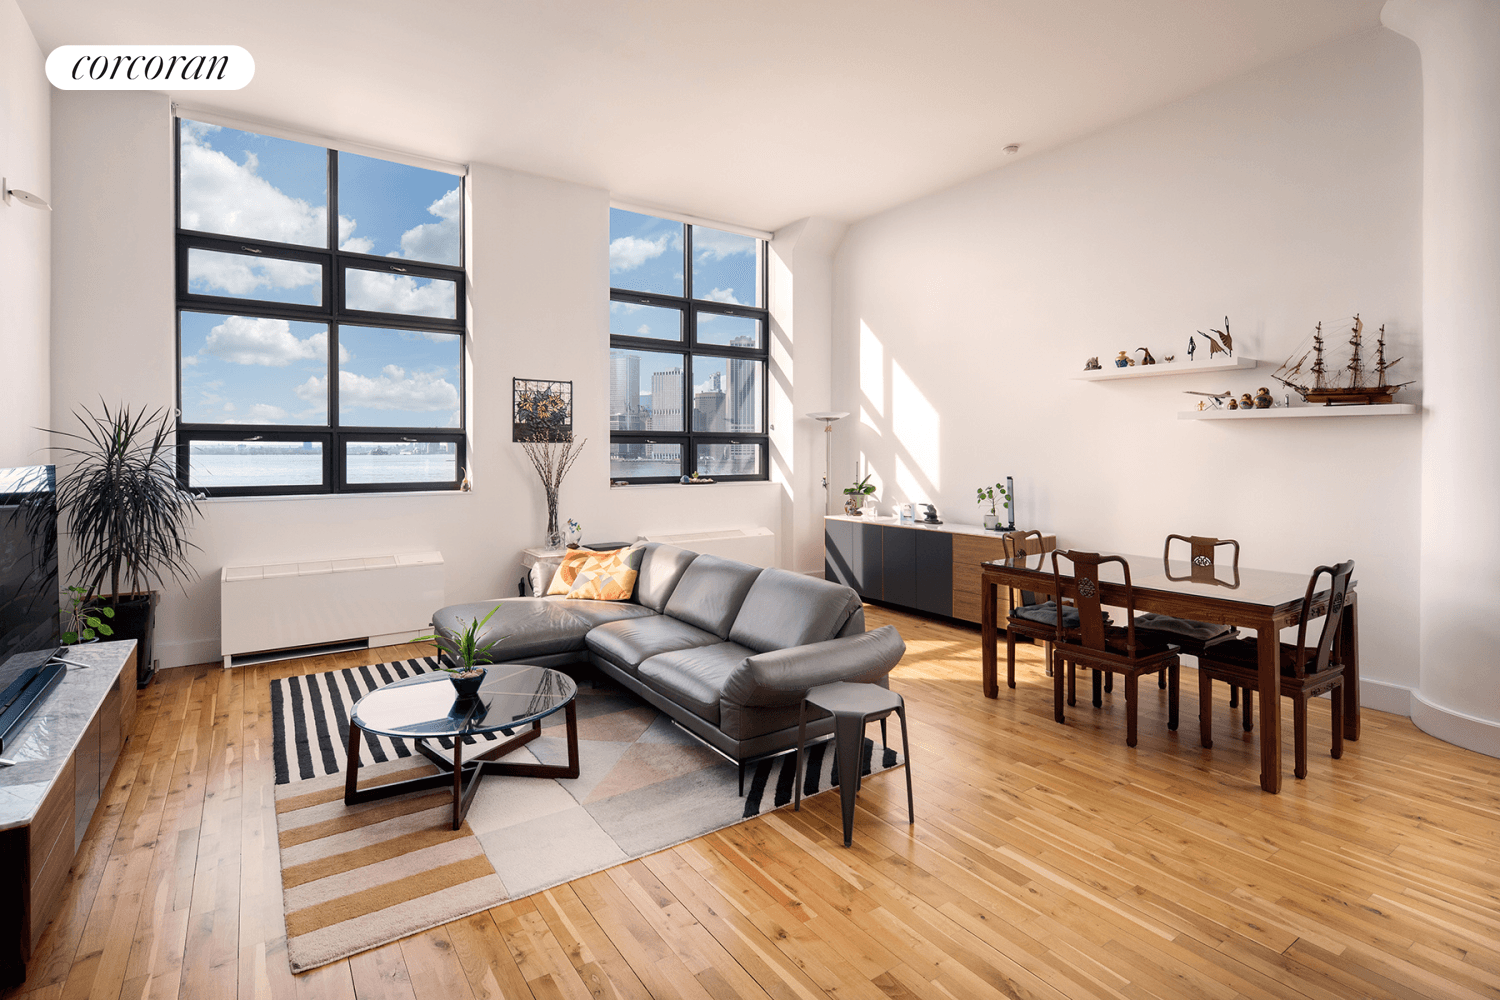 Stunning 1082 sf LOFT home office at the coveted One Brooklyn Bridge Condominium with spectacular views of the NY Harbor and Lower Manhattan Skyline.